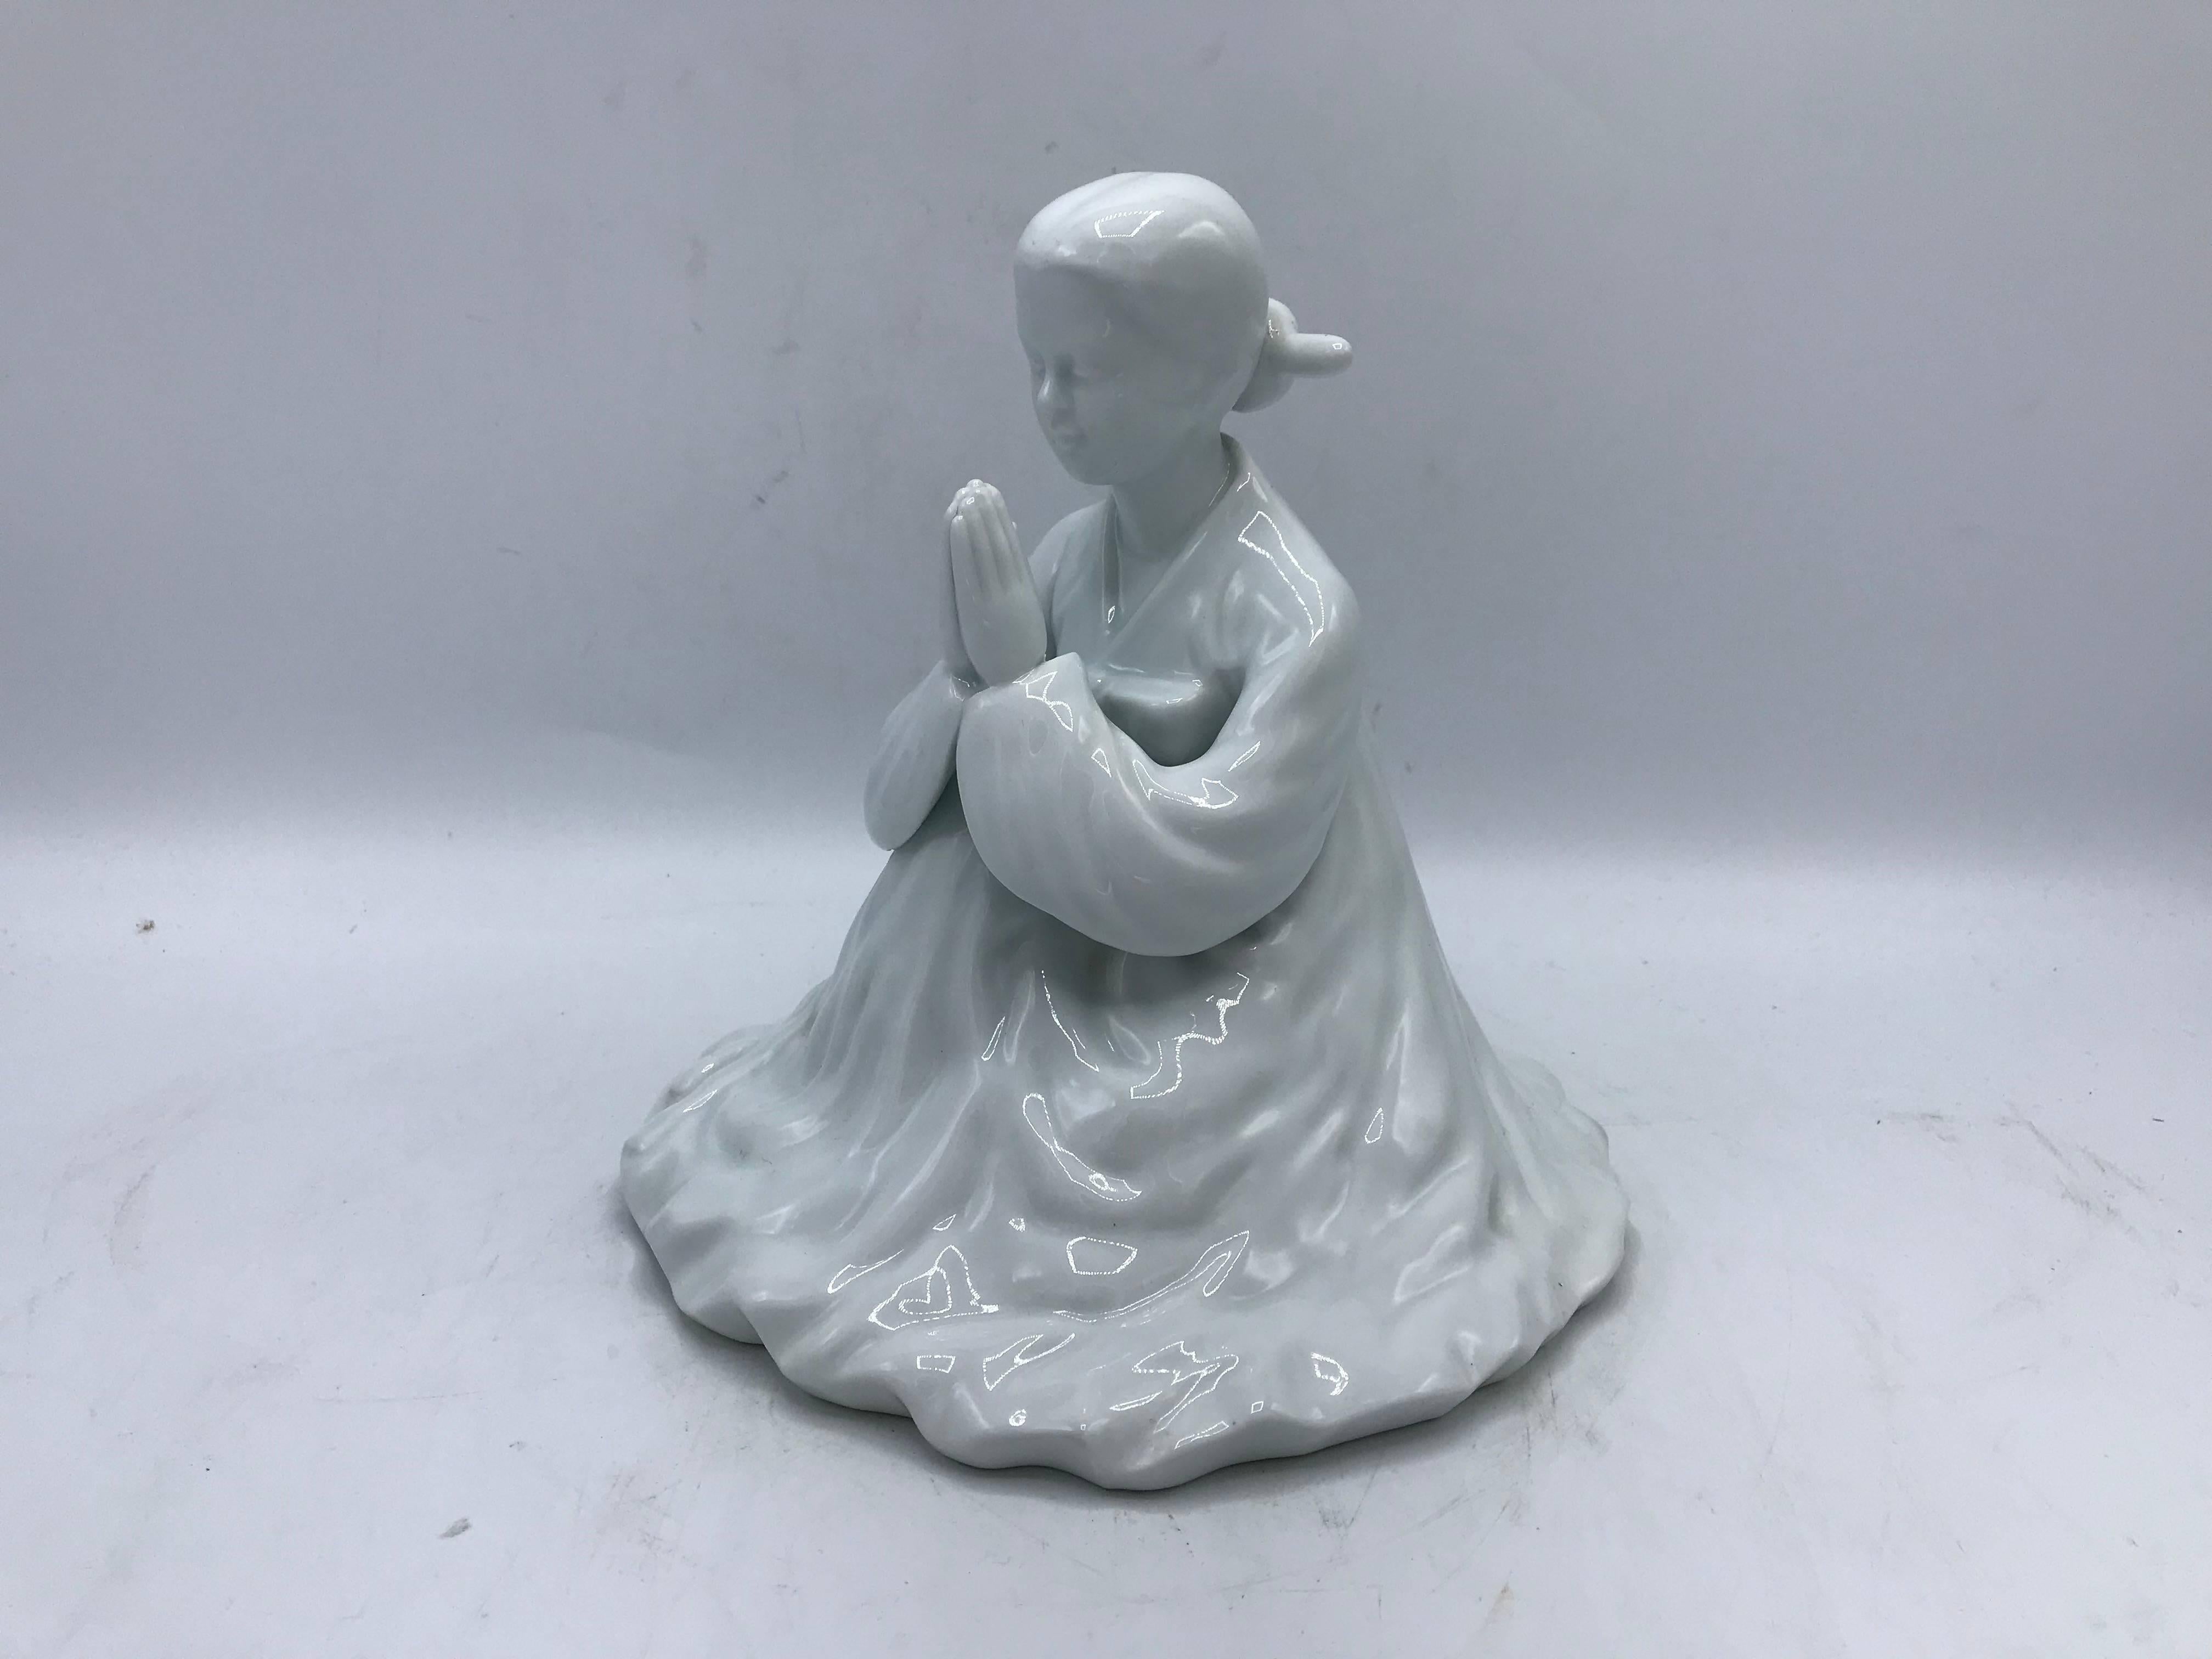 Listed is a beautiful and large, 1960s porcelain Blanc de Chine geisha sculpture. The ornate piece has the geisha in a praying position in her kimono.